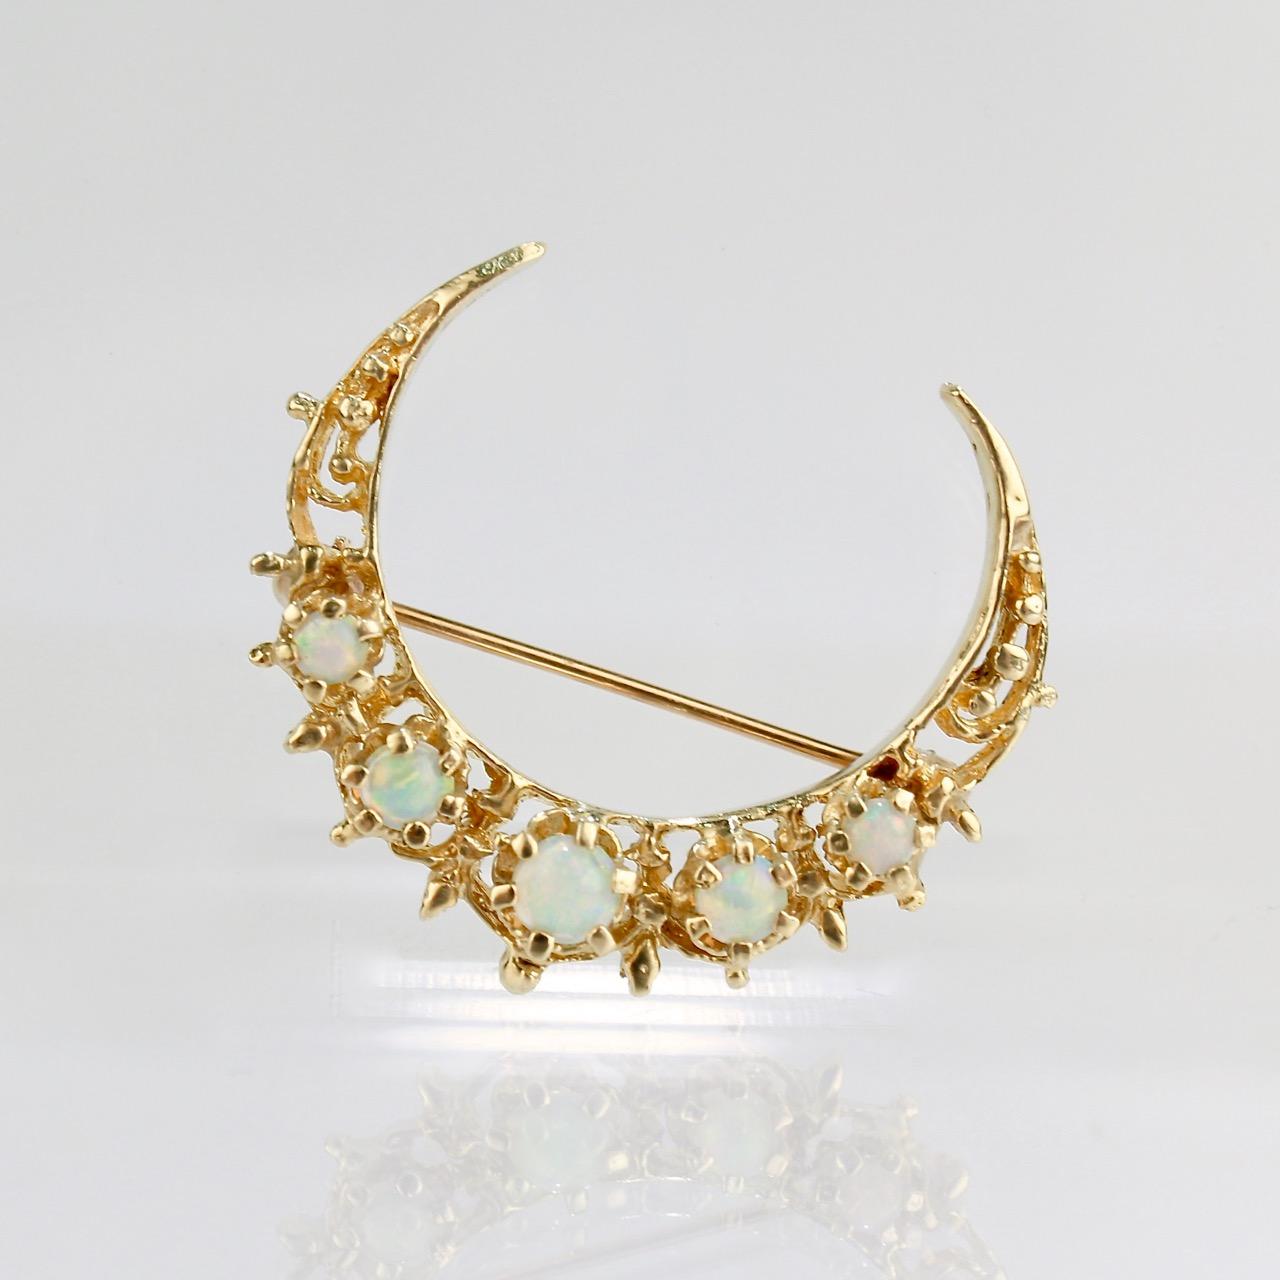 A lovely, vintage gold brooch of a crescent moon.

The 14k gold setting is delicately designed with filigree and openwork and is mounted with 5 prong-set opal cabochons. 

The crescent moon is a harbinger of new things to come. Both waxing or